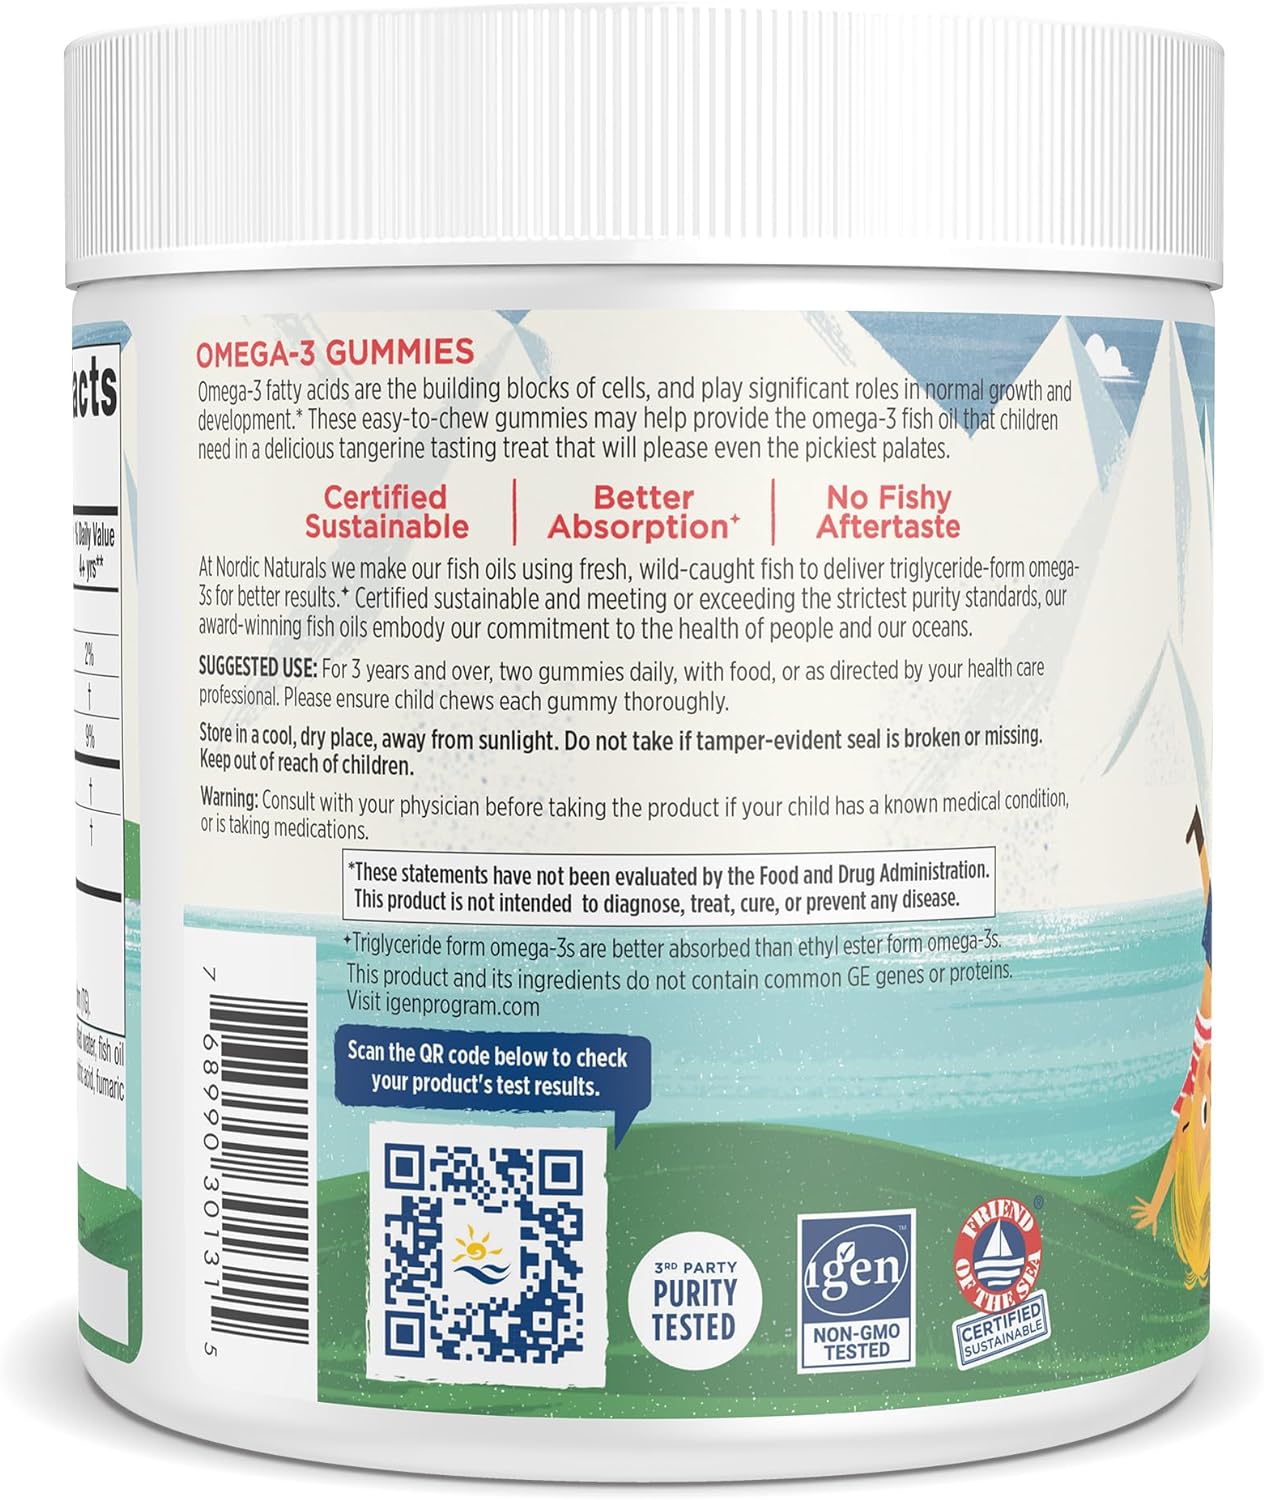 Nordic Naturals Nordic Omega-3 Gummies, Tangerine - 120 Gummies - 82 Mg Total Omega-3S With Epa  Dha - Non-Gmo - 60 Servings